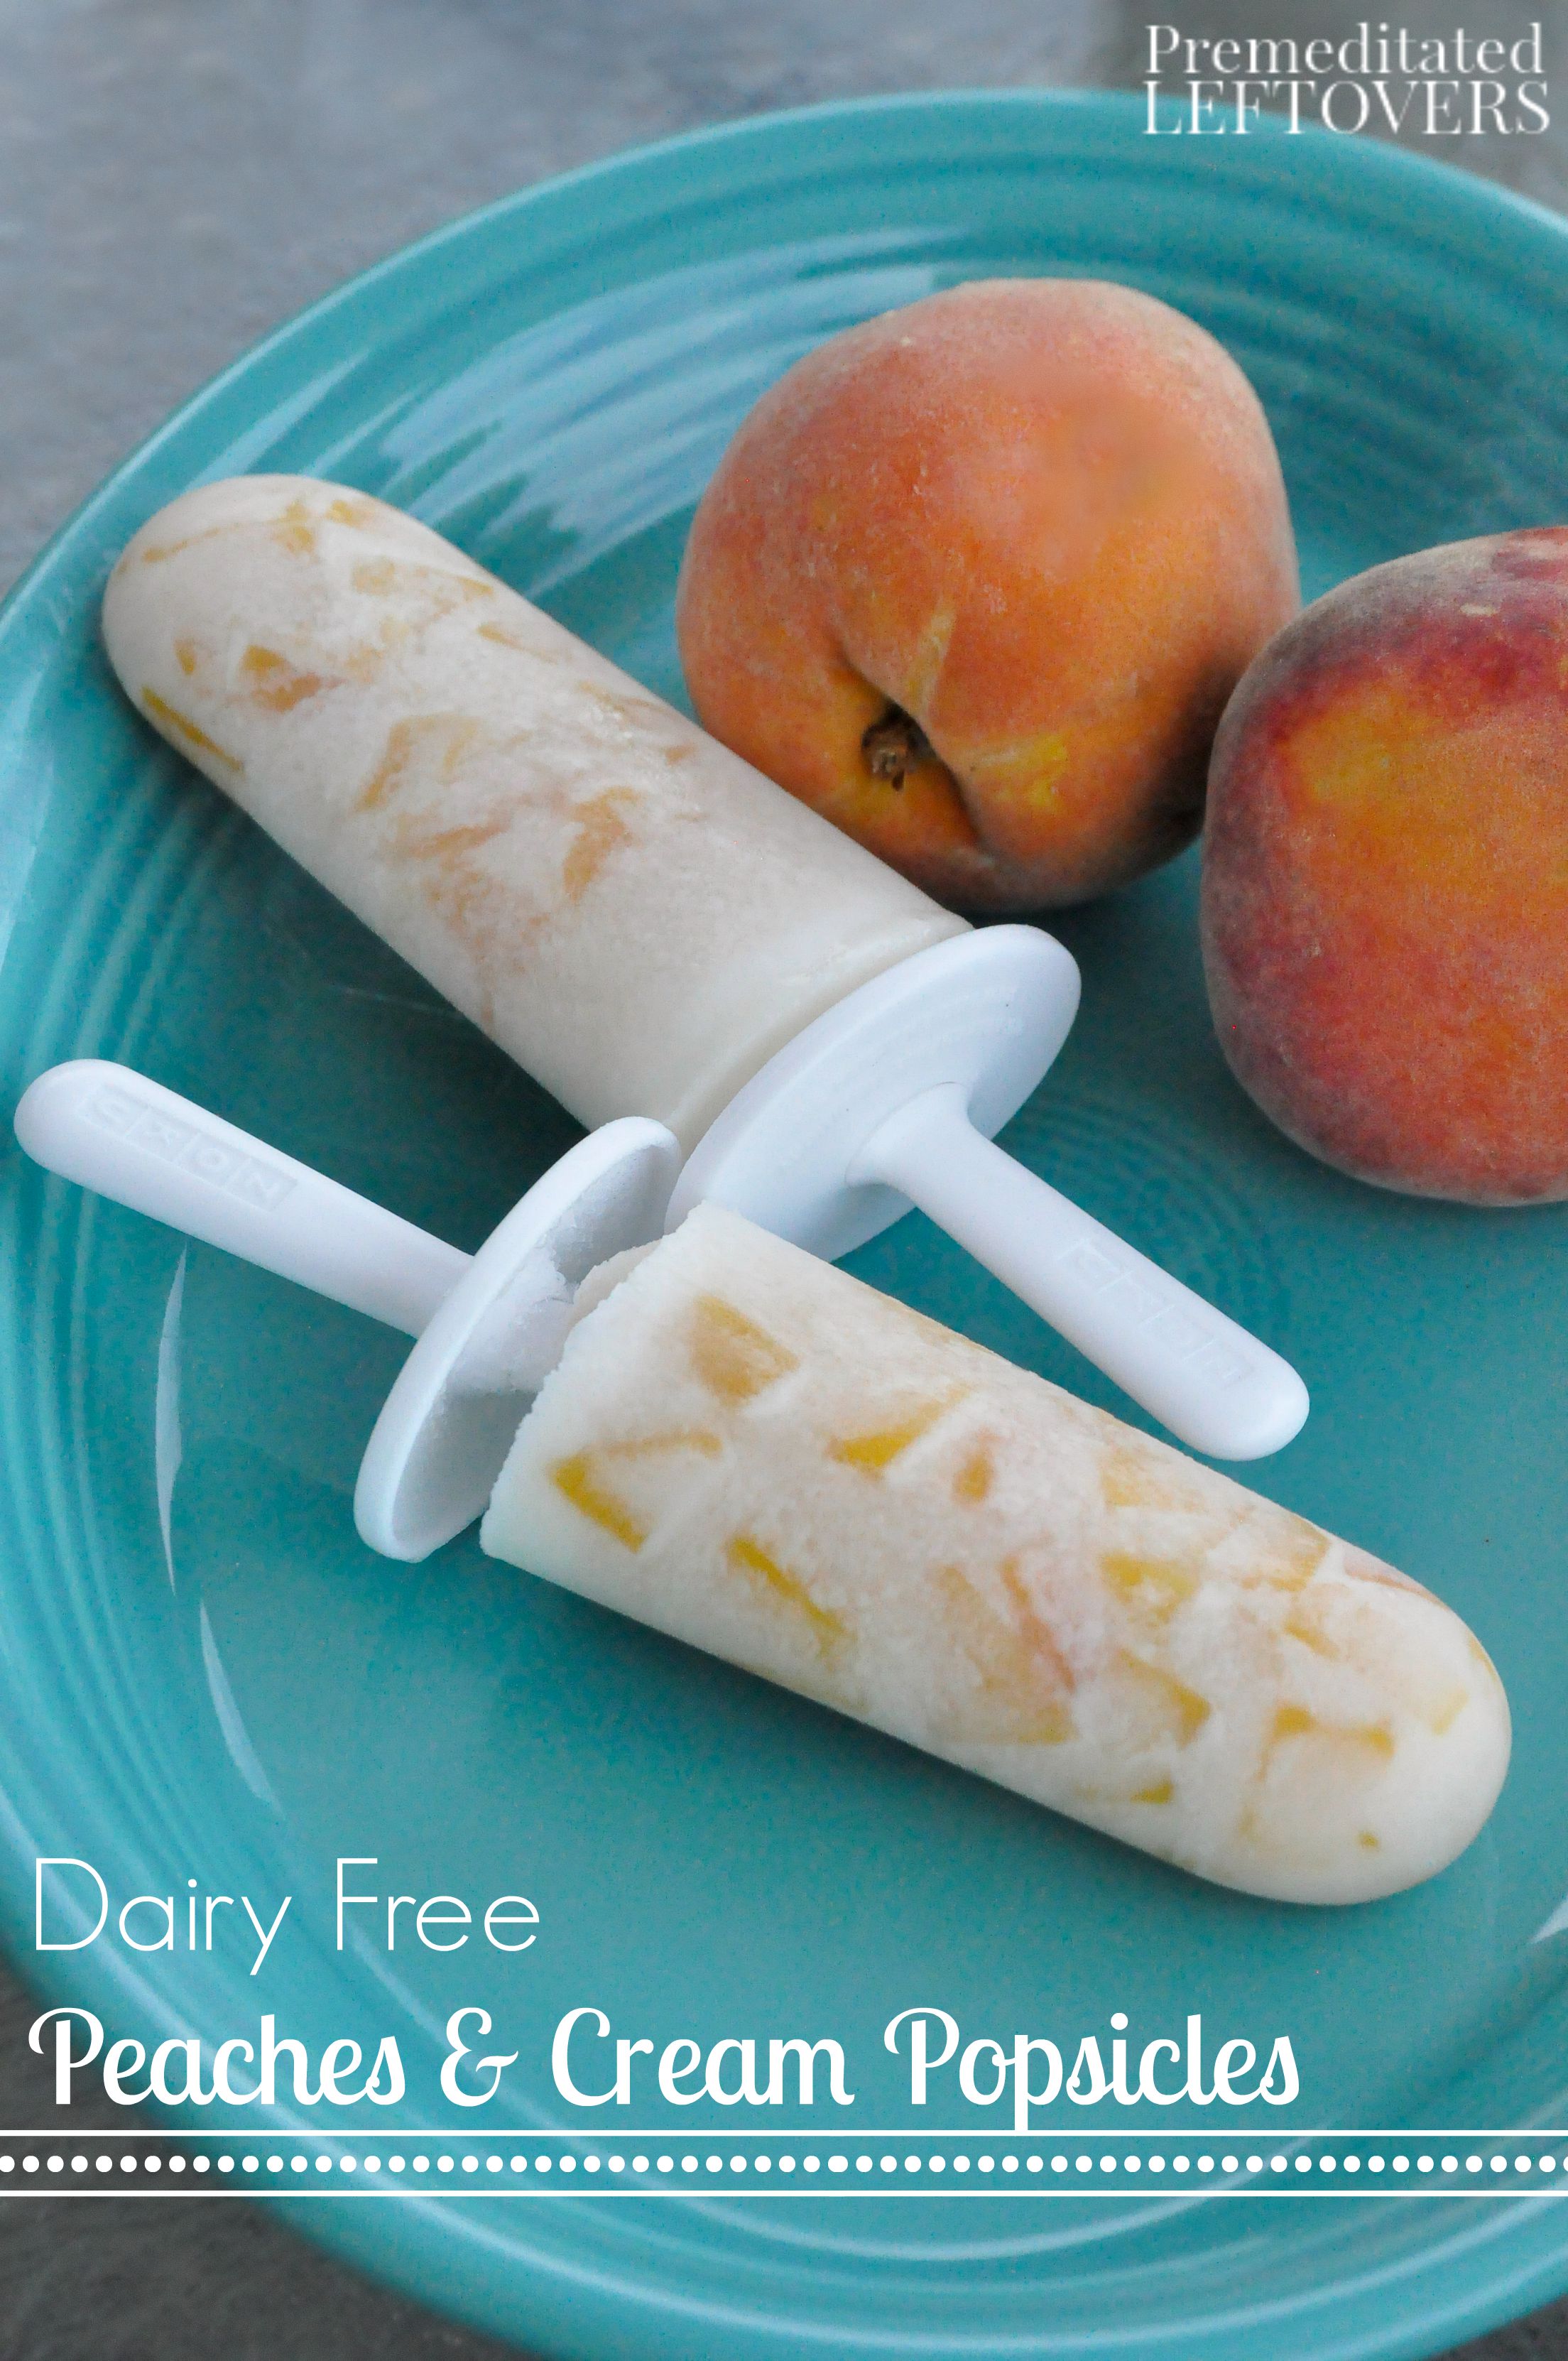 Easy Dairy-Free Peaches and Cream Popsicles Recipe  - These delicious dairy-free peaches and cream popsicles are made with just 3 natural ingredients.